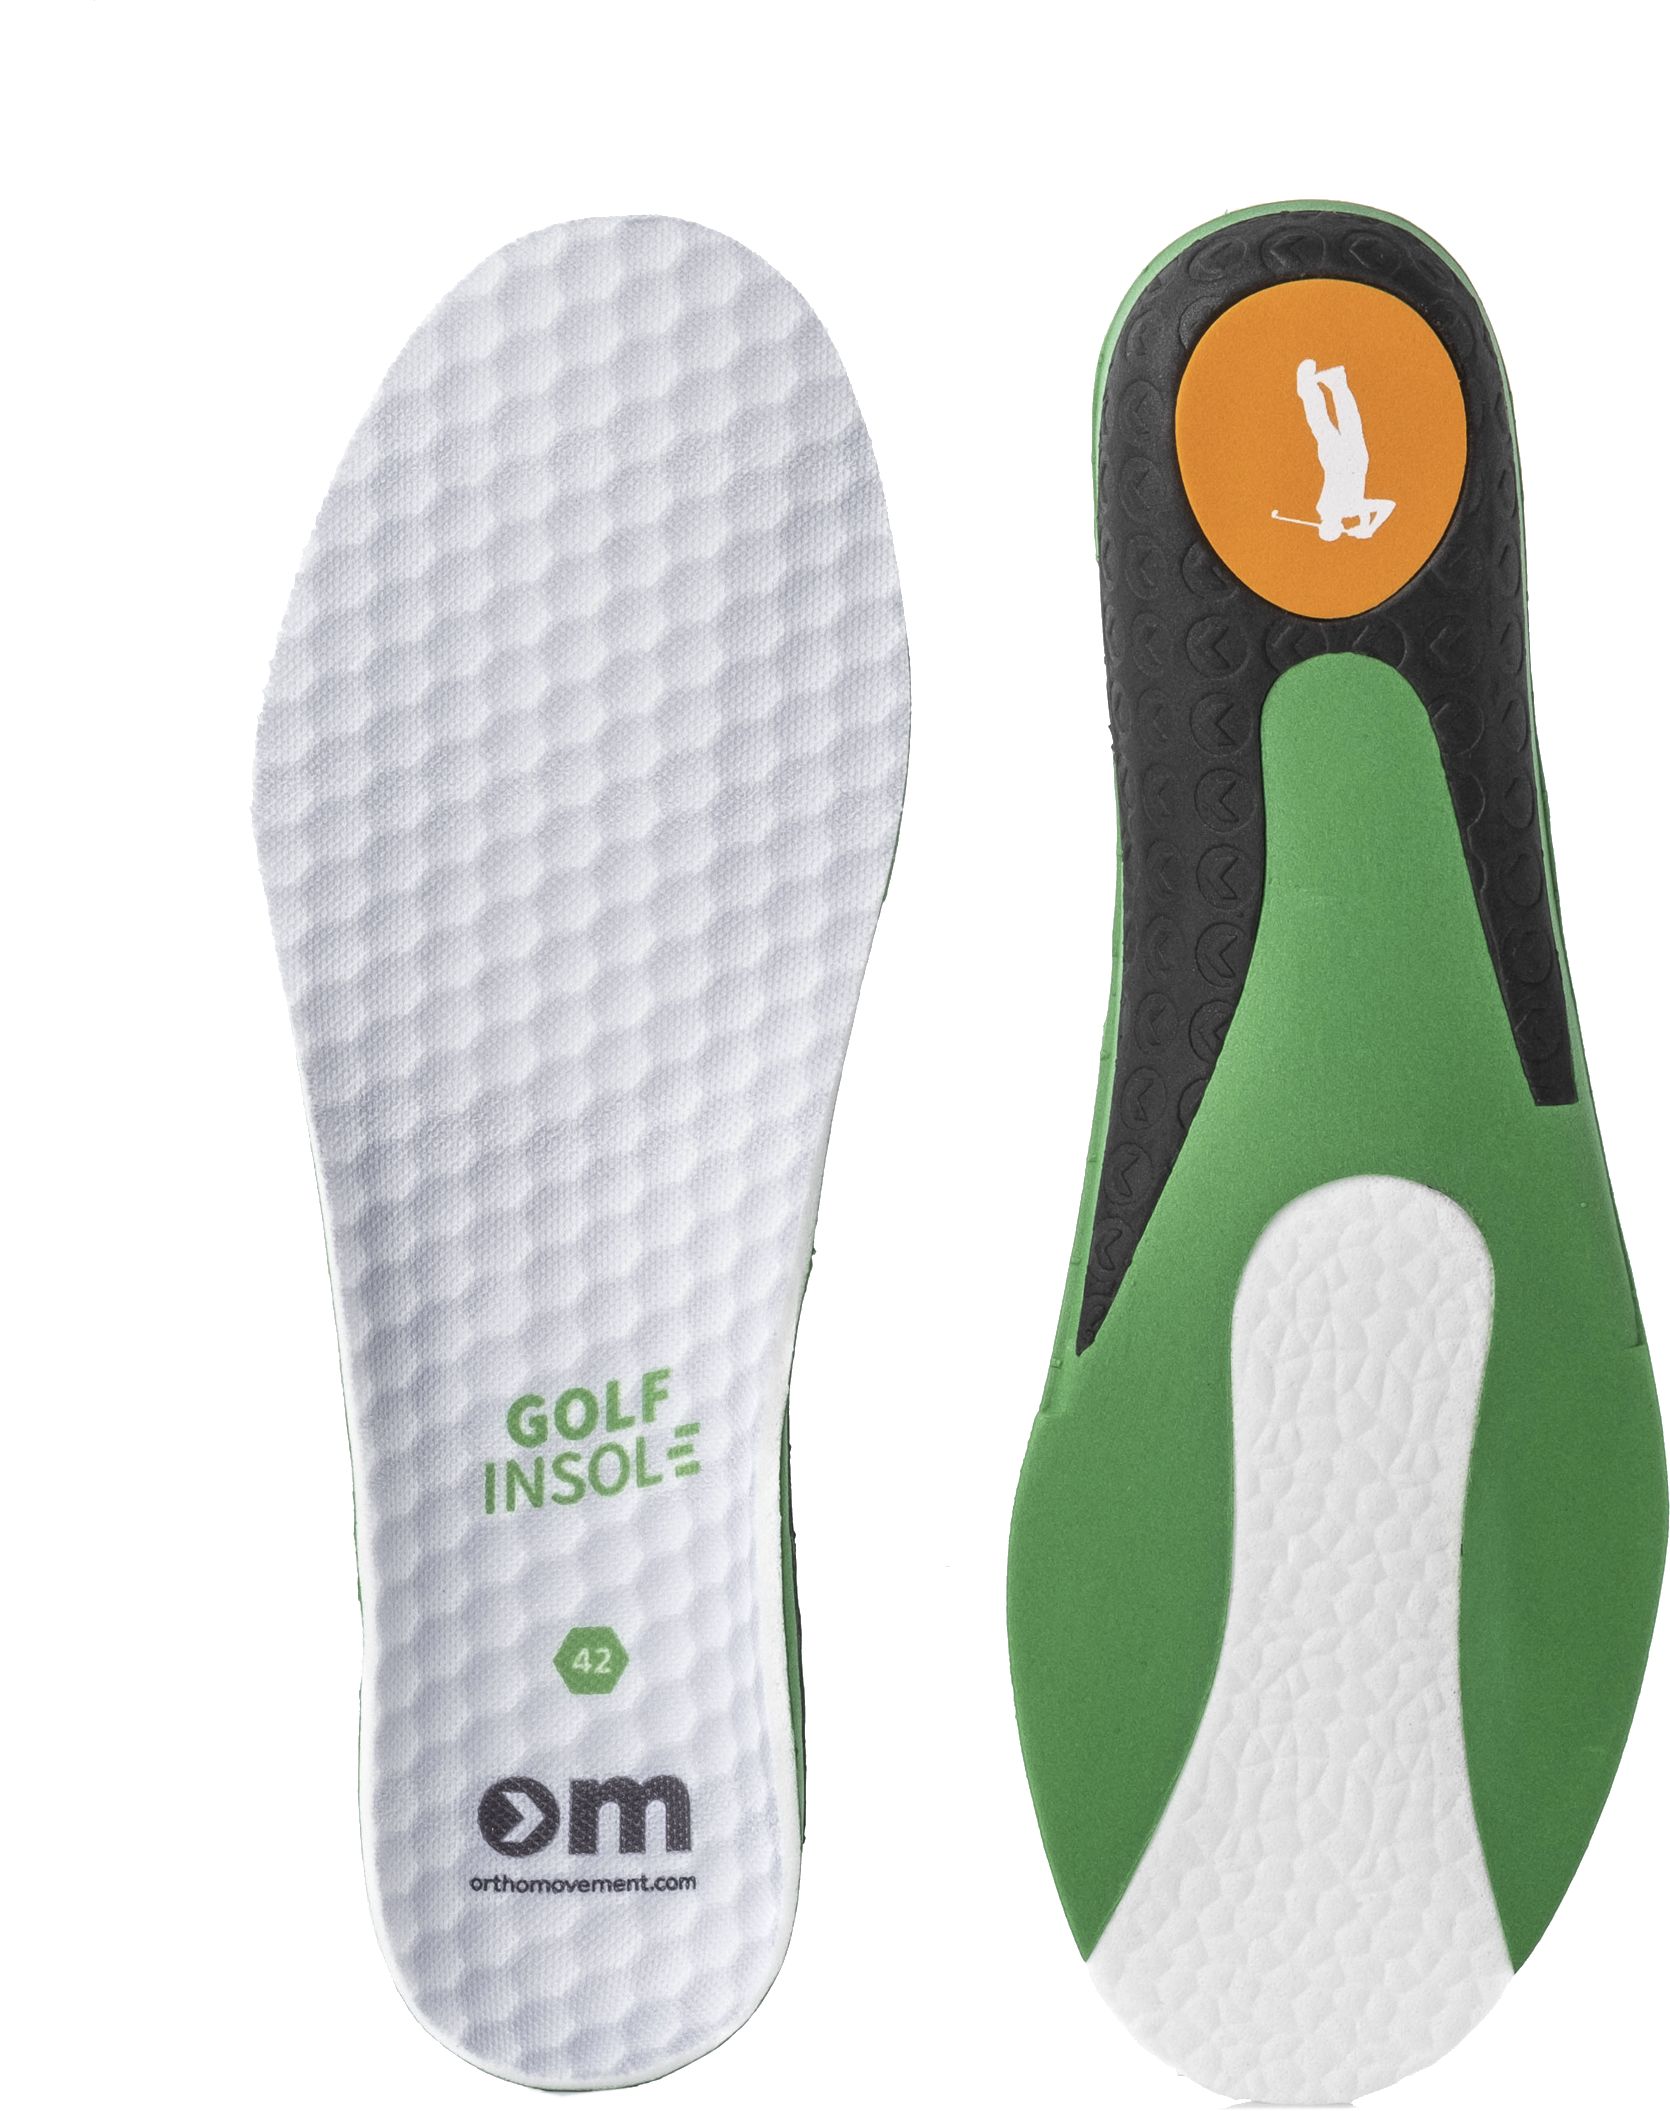 ORTHO MOVEMENT, GOLF INSOLE